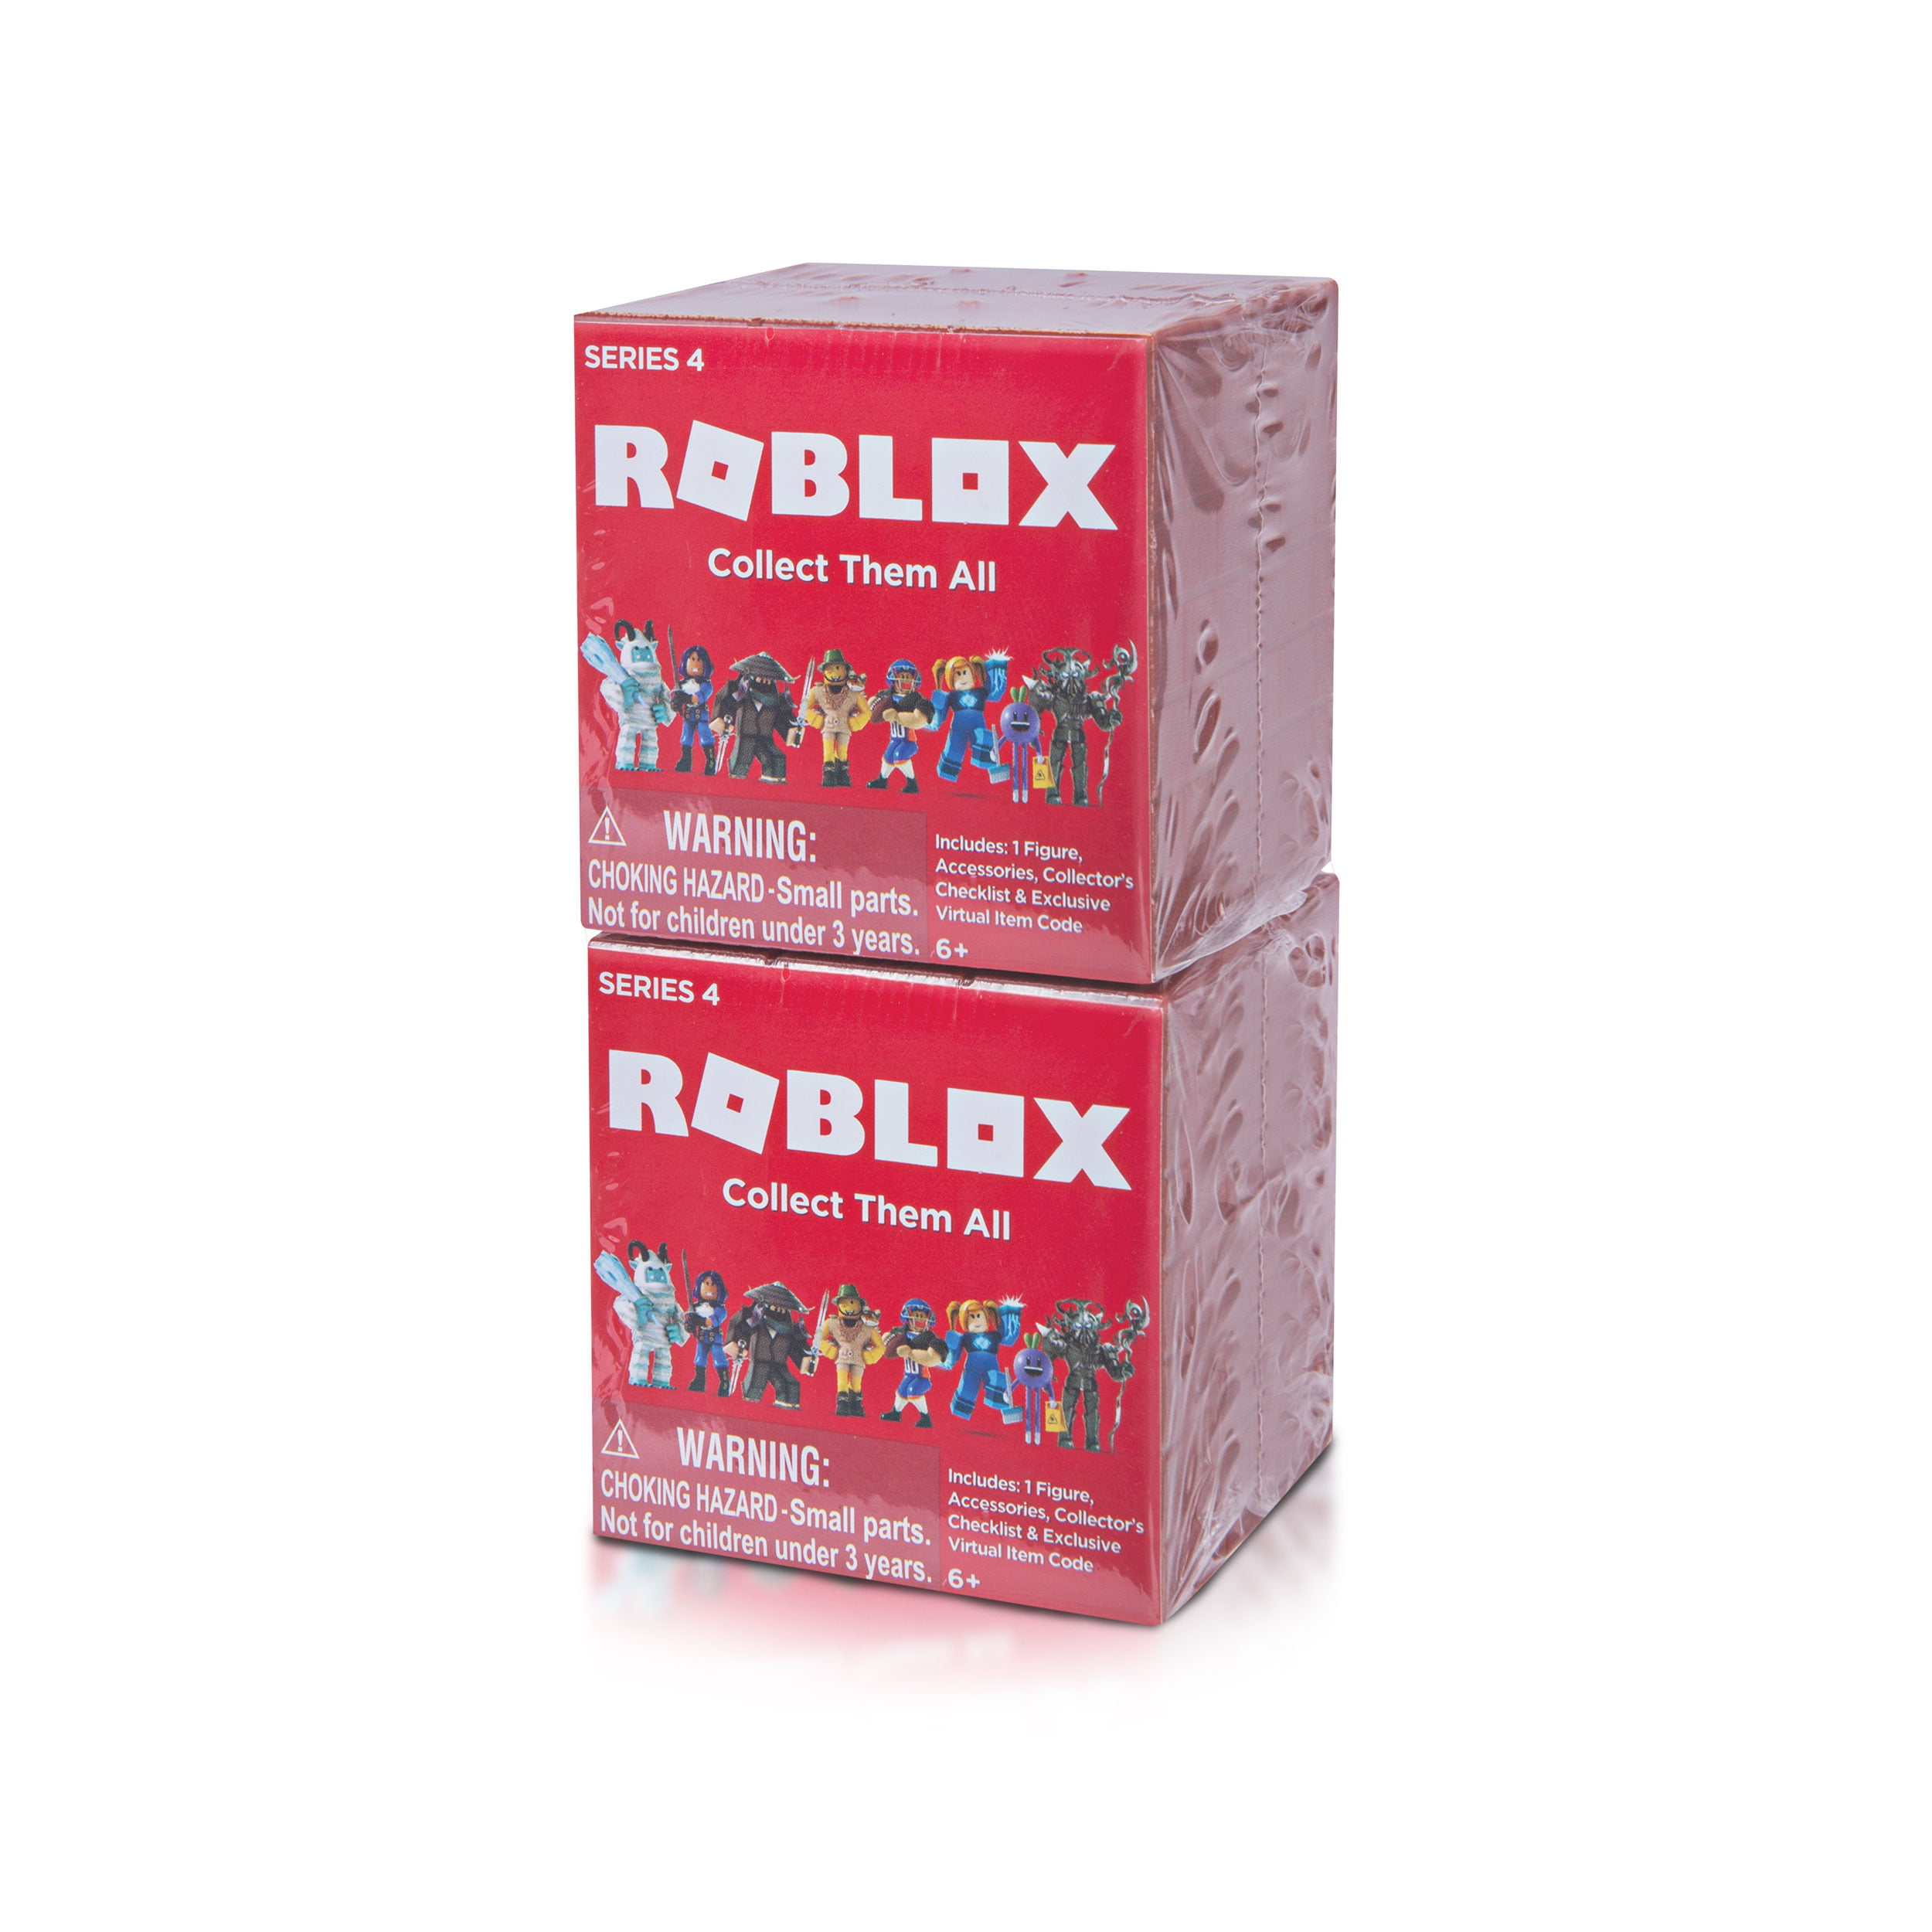 Roblox Series 1 2 3 4 Mystery Red Box Figures Kids Toys - details about roblox series 1 2 3 4 mystery red box figures